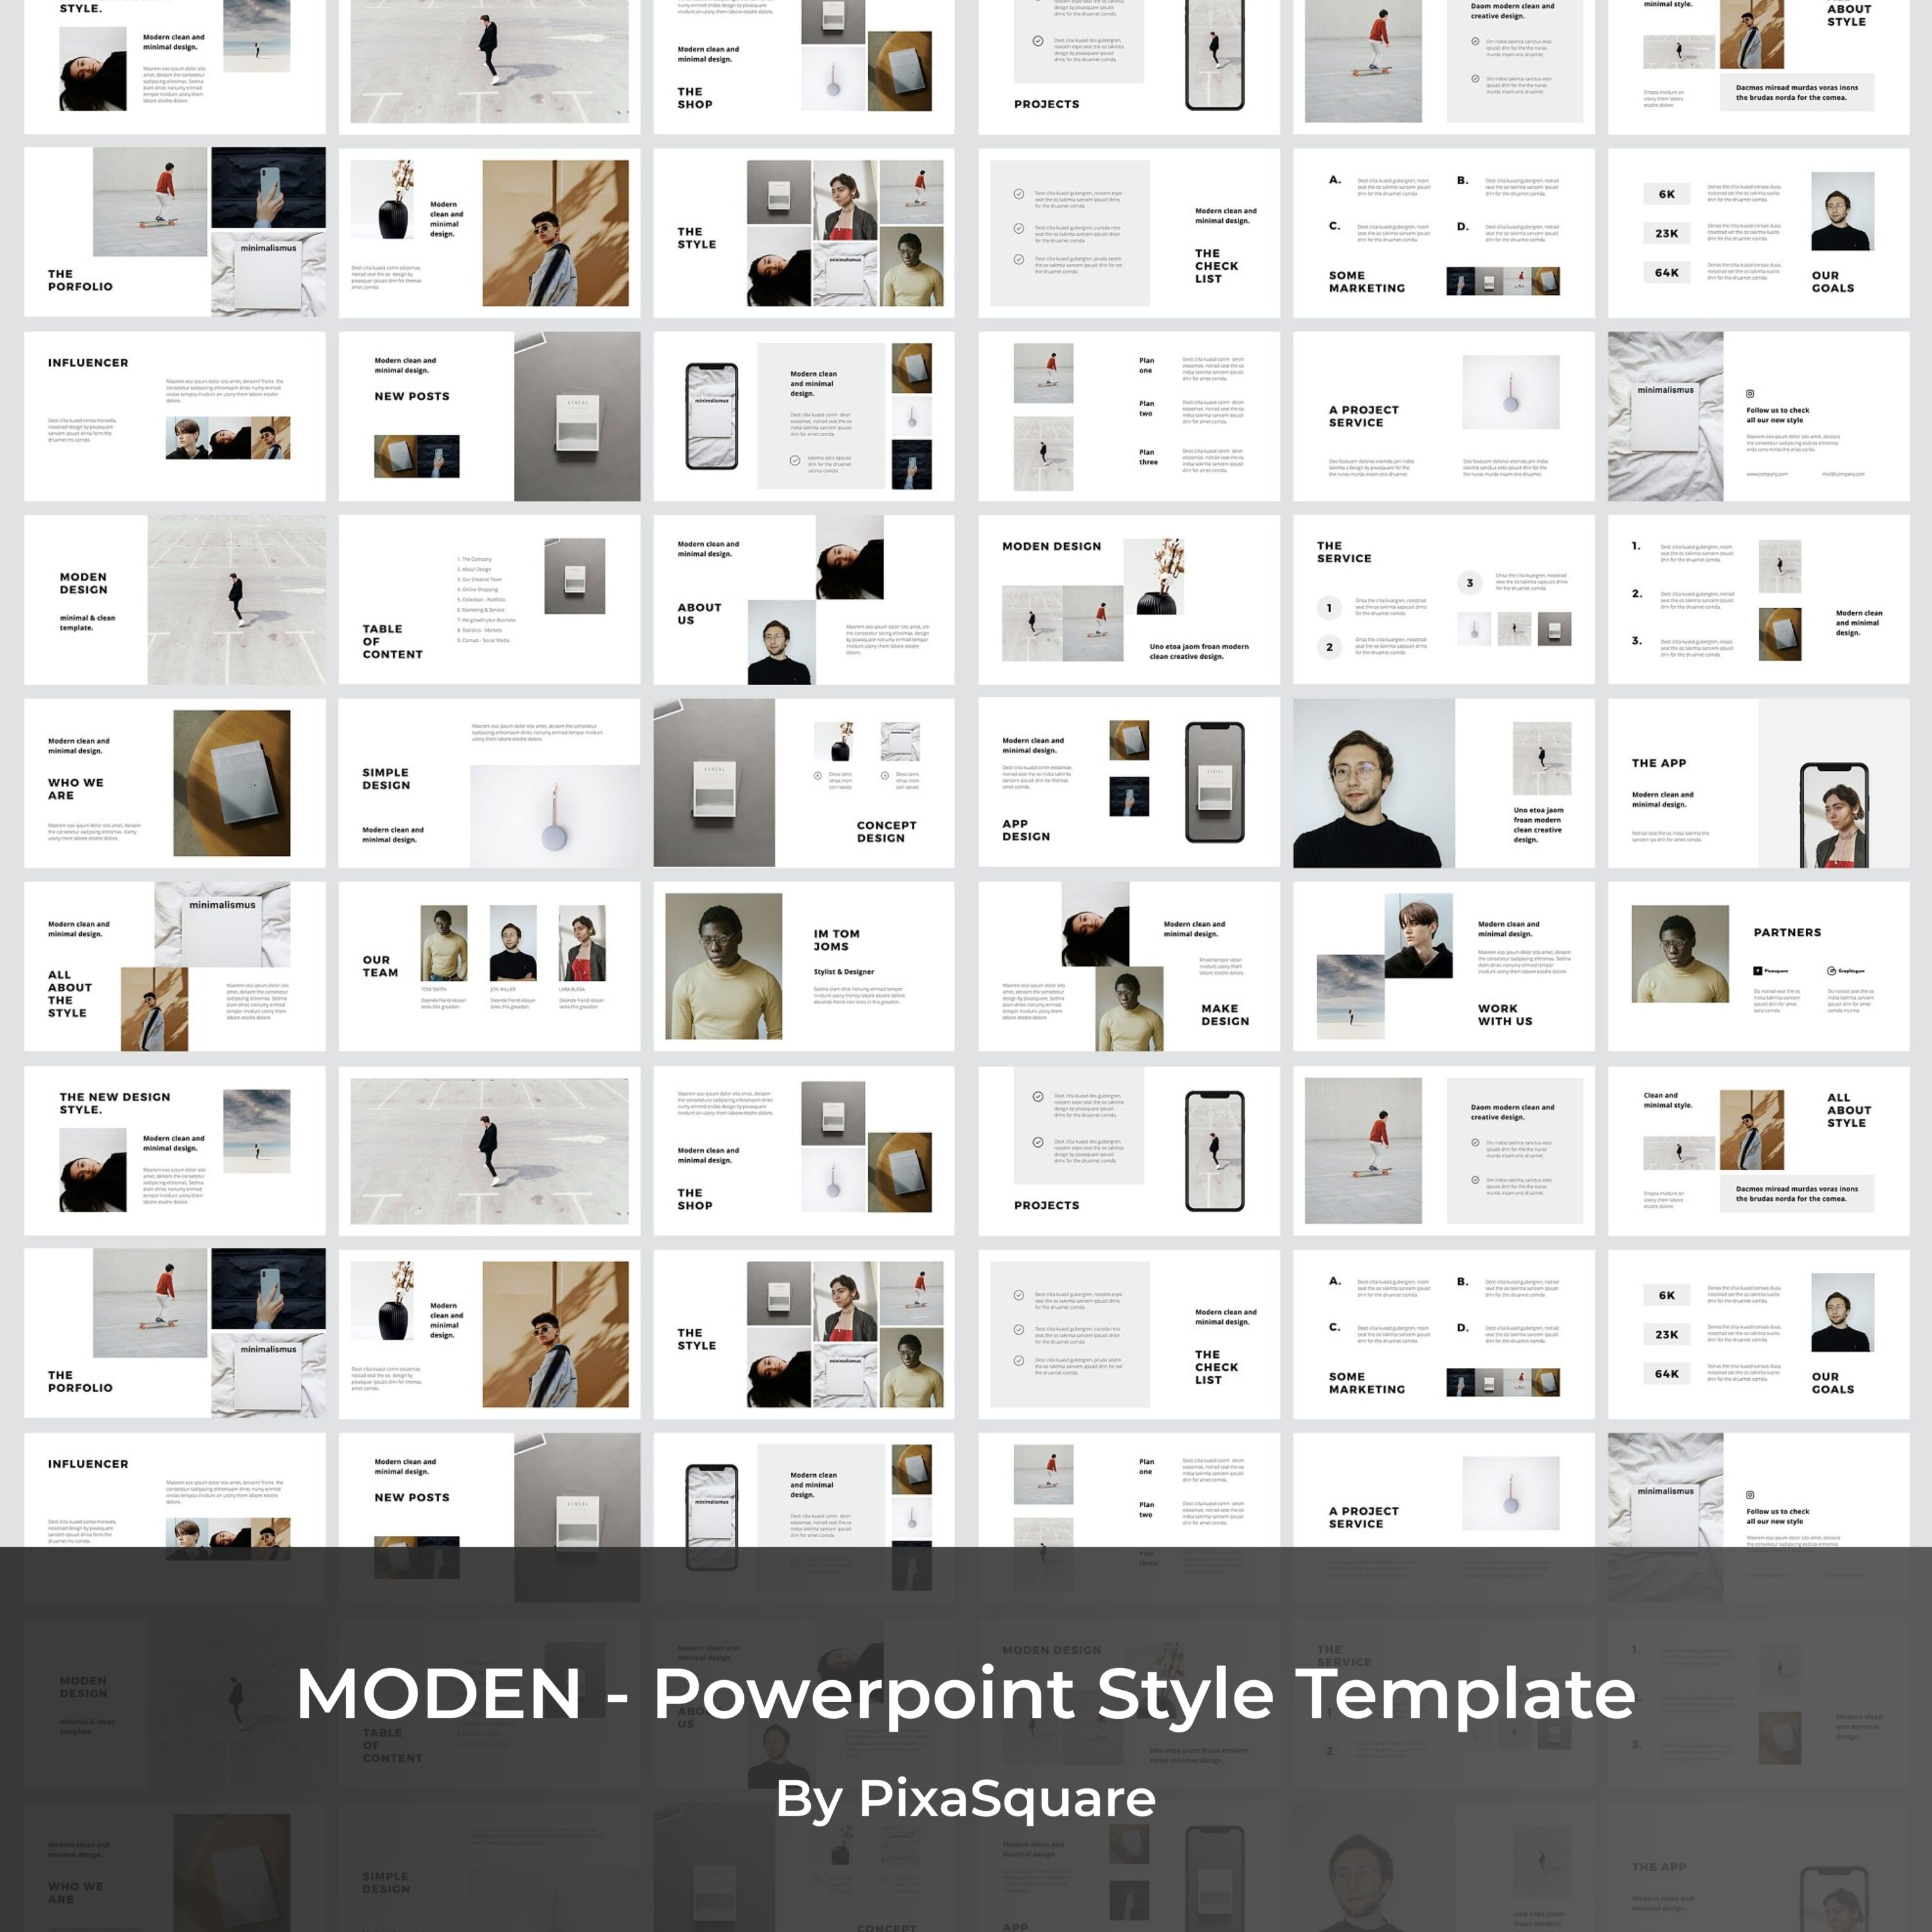 MODEN - Powerpoint Style Template.